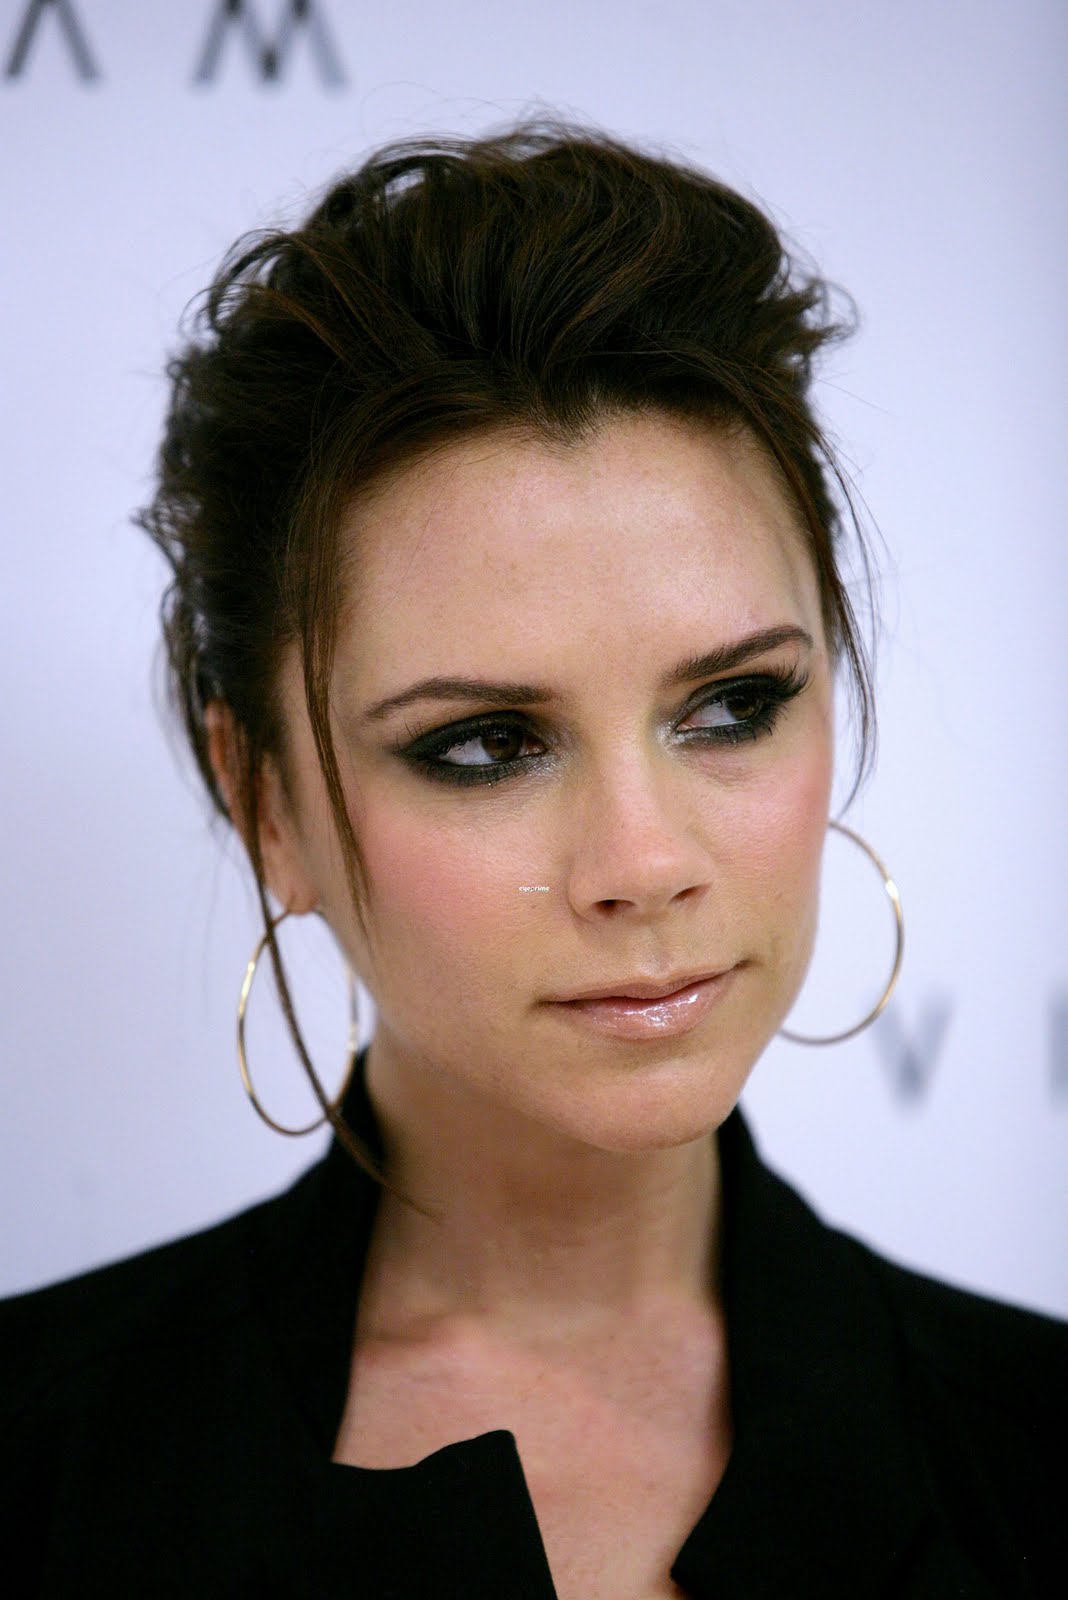 Wallpaper World: Victoria Beckham is Beautiful and Sexy Actress and ...